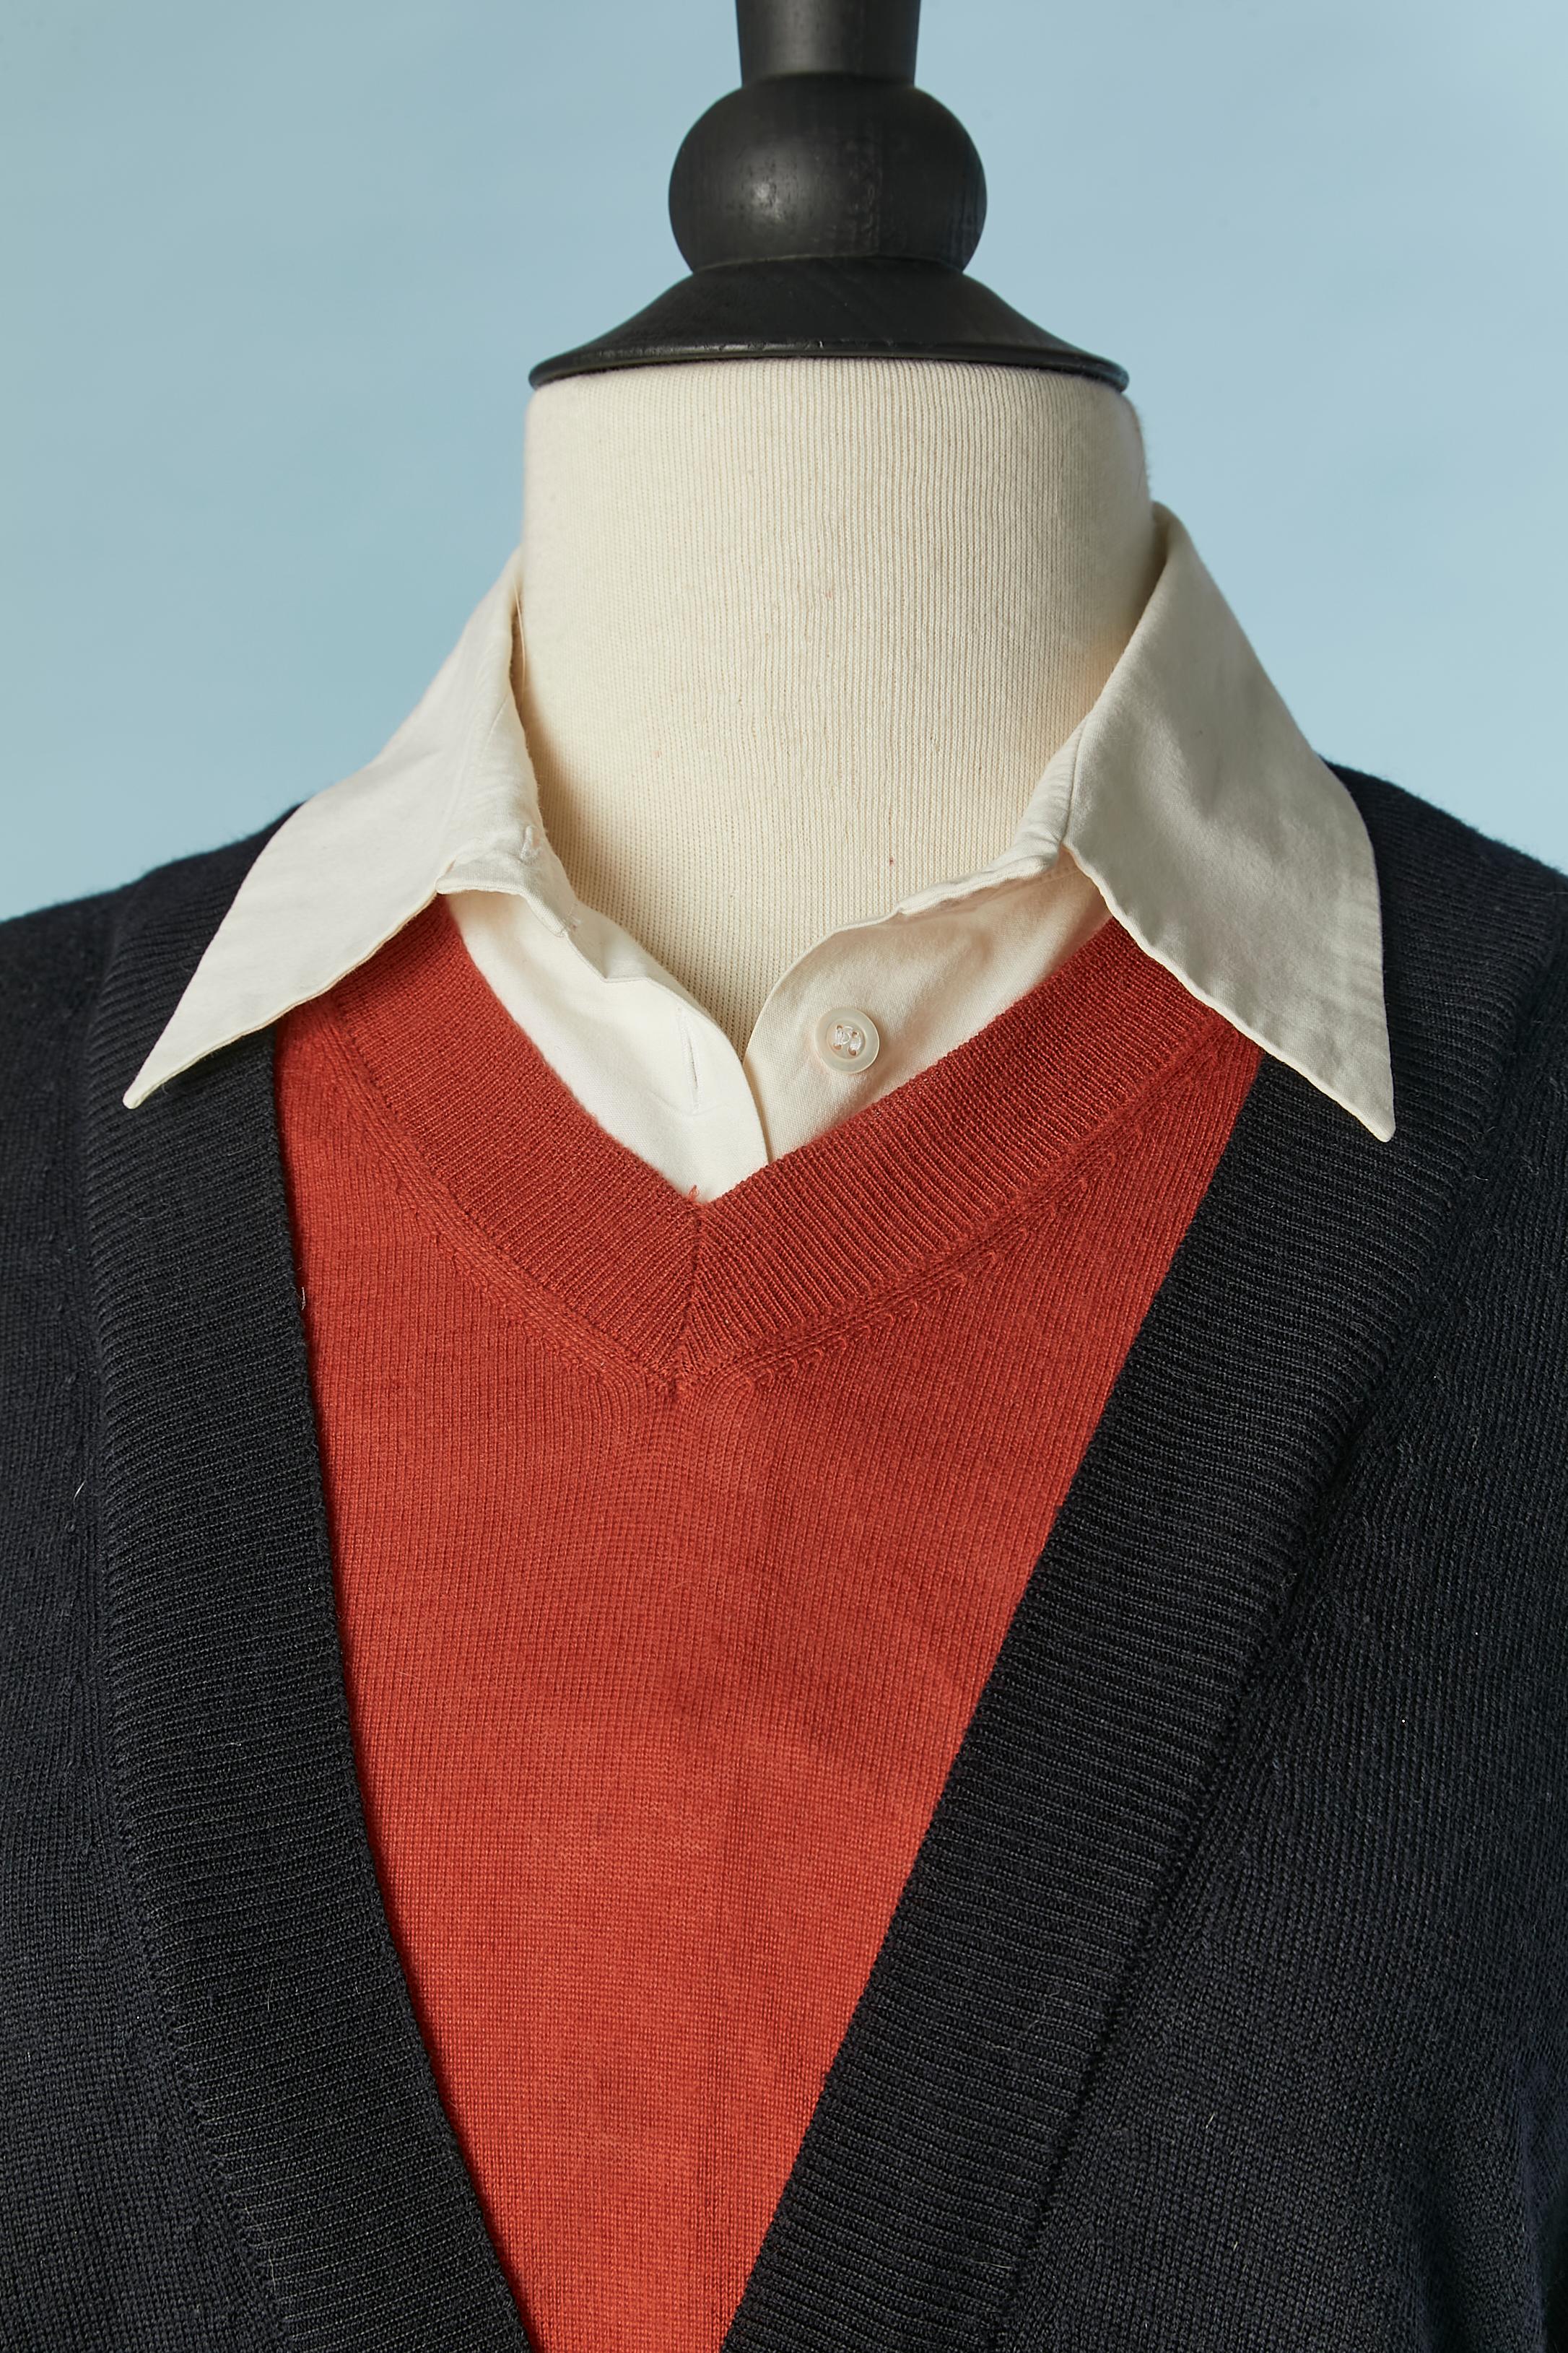 Trompe l'oeil oversize wool sweater with detachable cotton shirt collar. ( one sweater with 2 neckline overlay)
Oversize